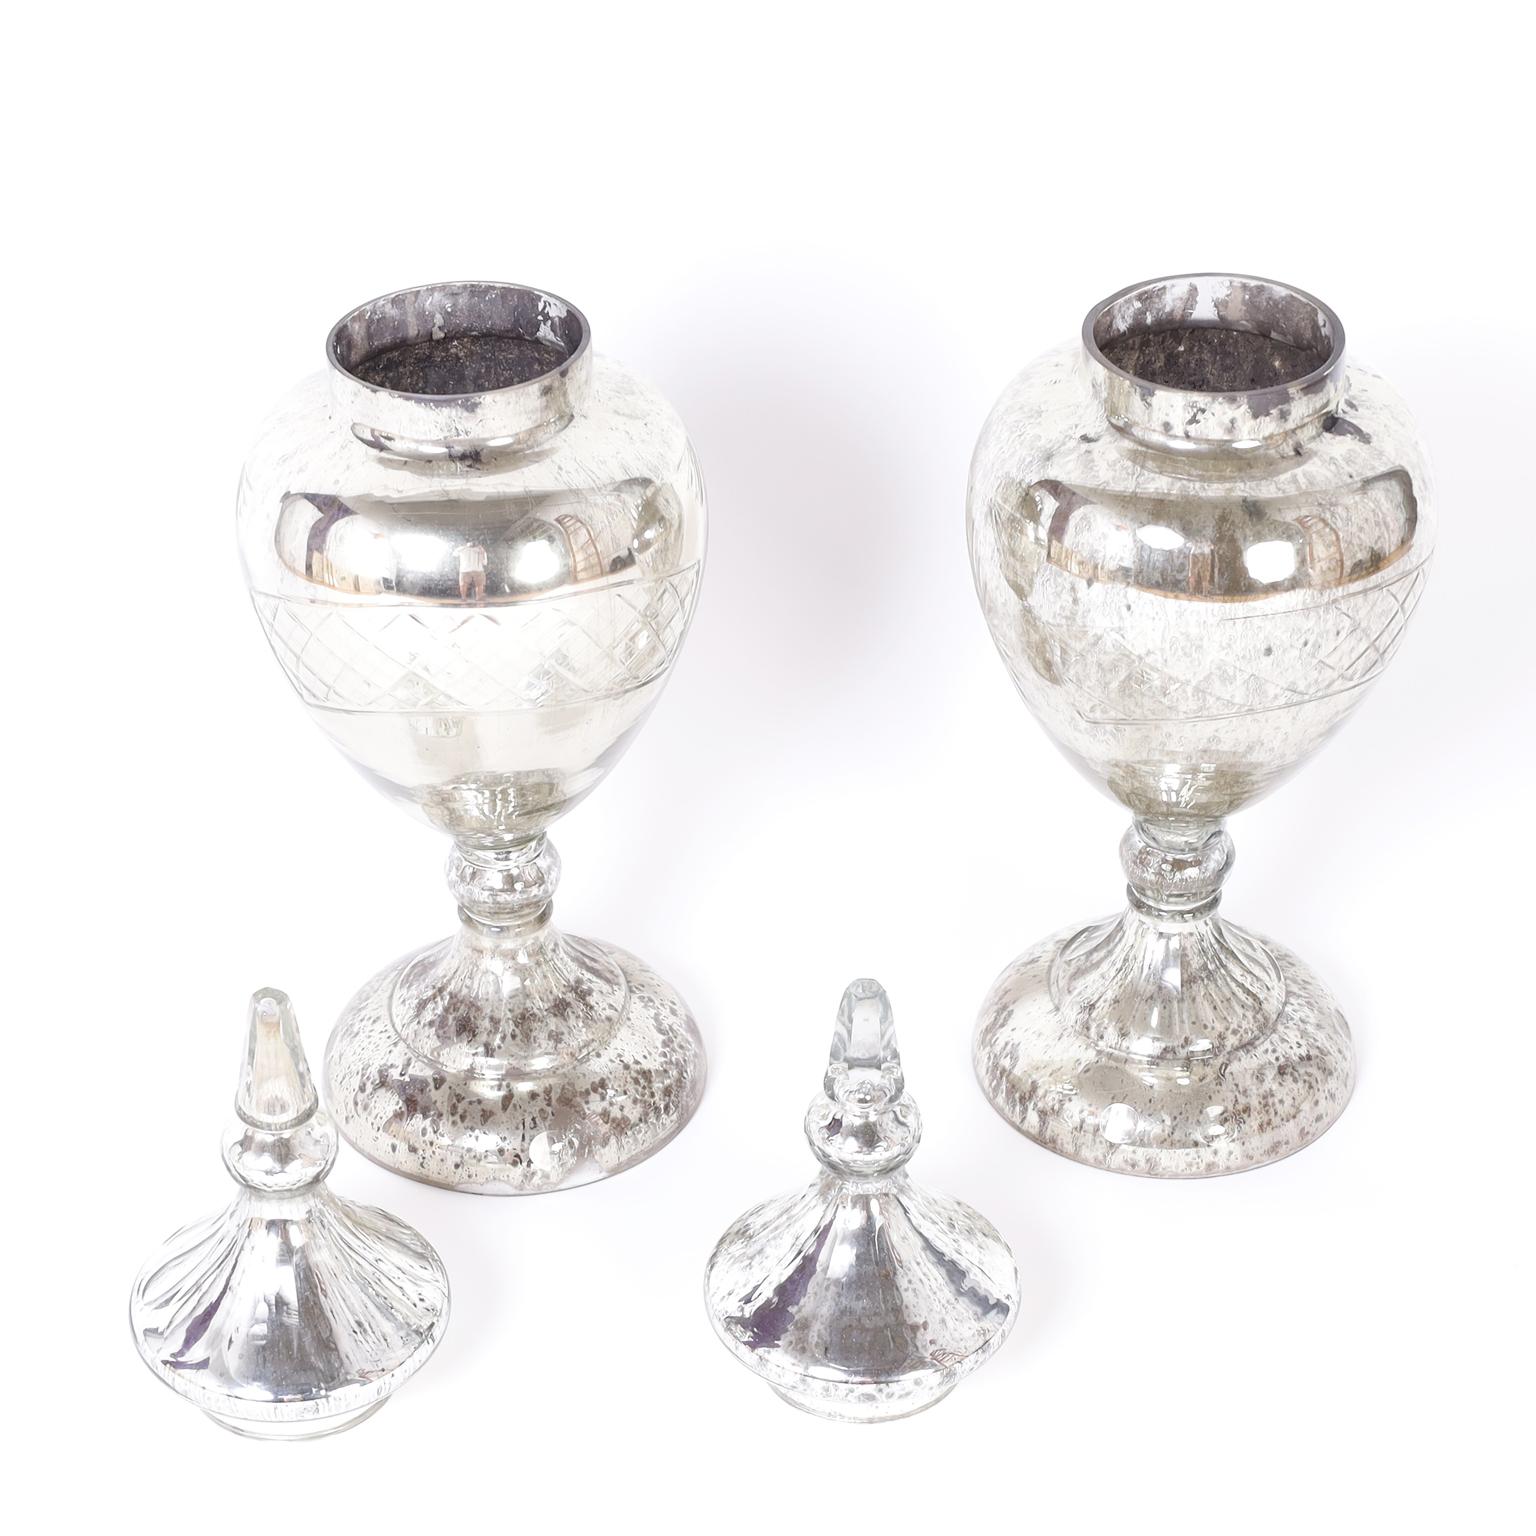 American Antique Mercury Glass Apothecary Urns For Sale